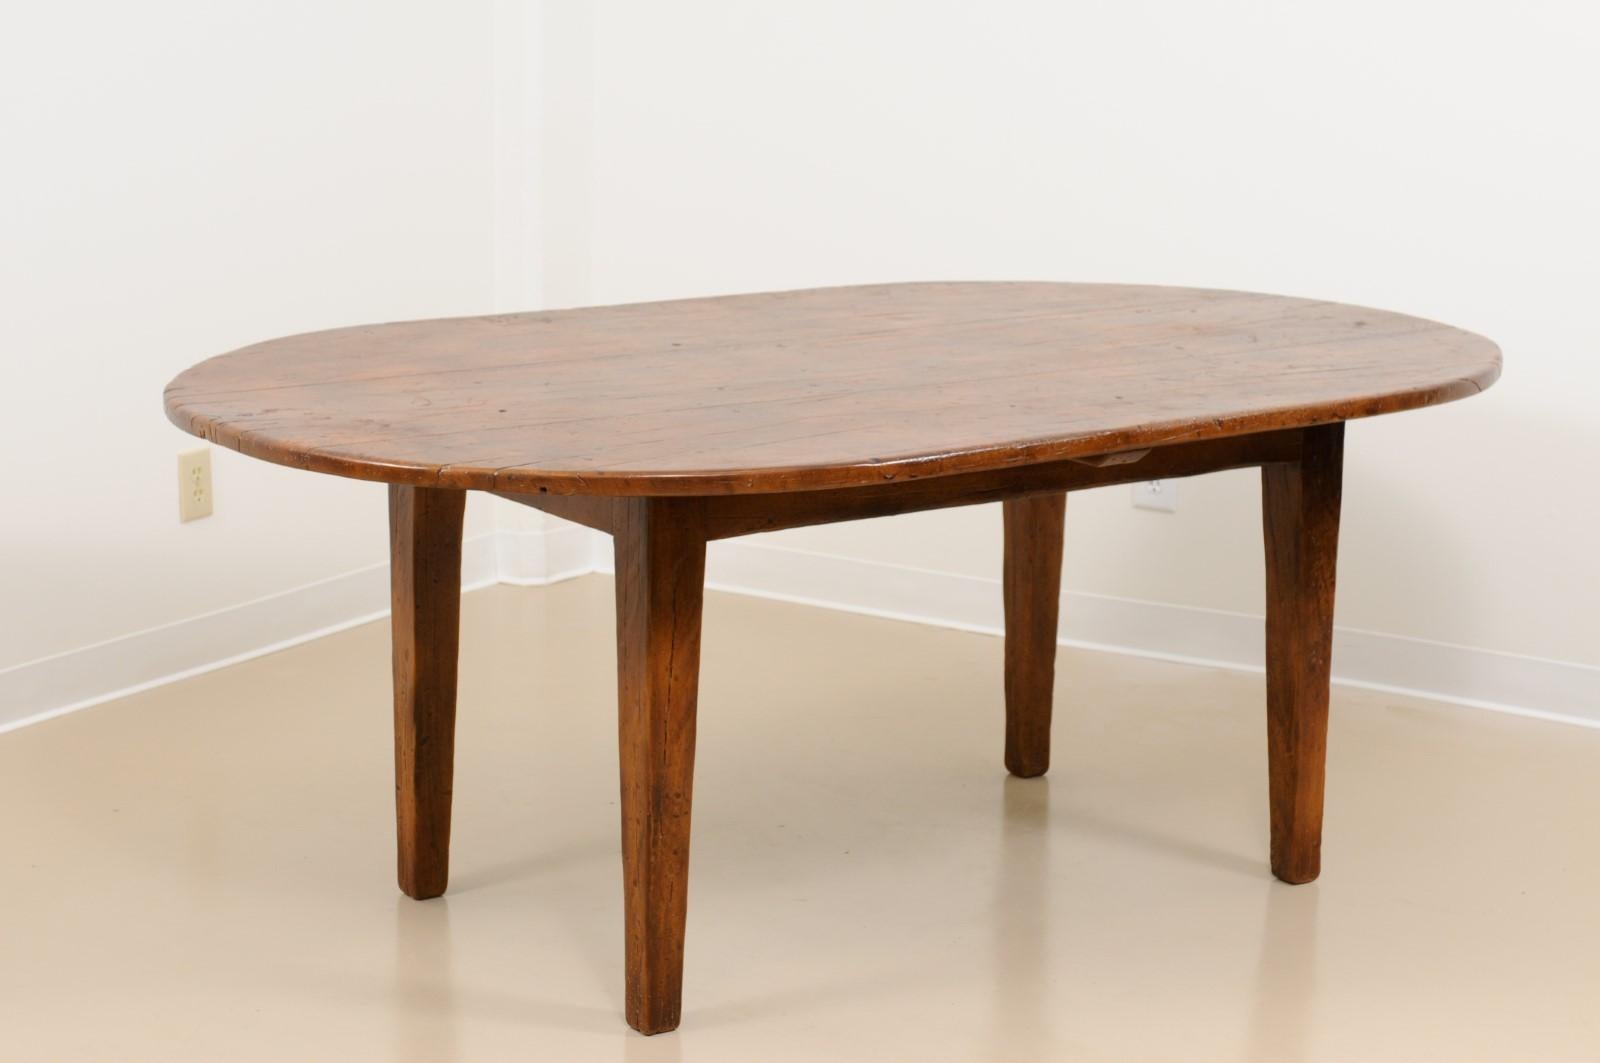 A French oval walnut dining with tapered legs. The table hand made out of solid walnut in the south of France.